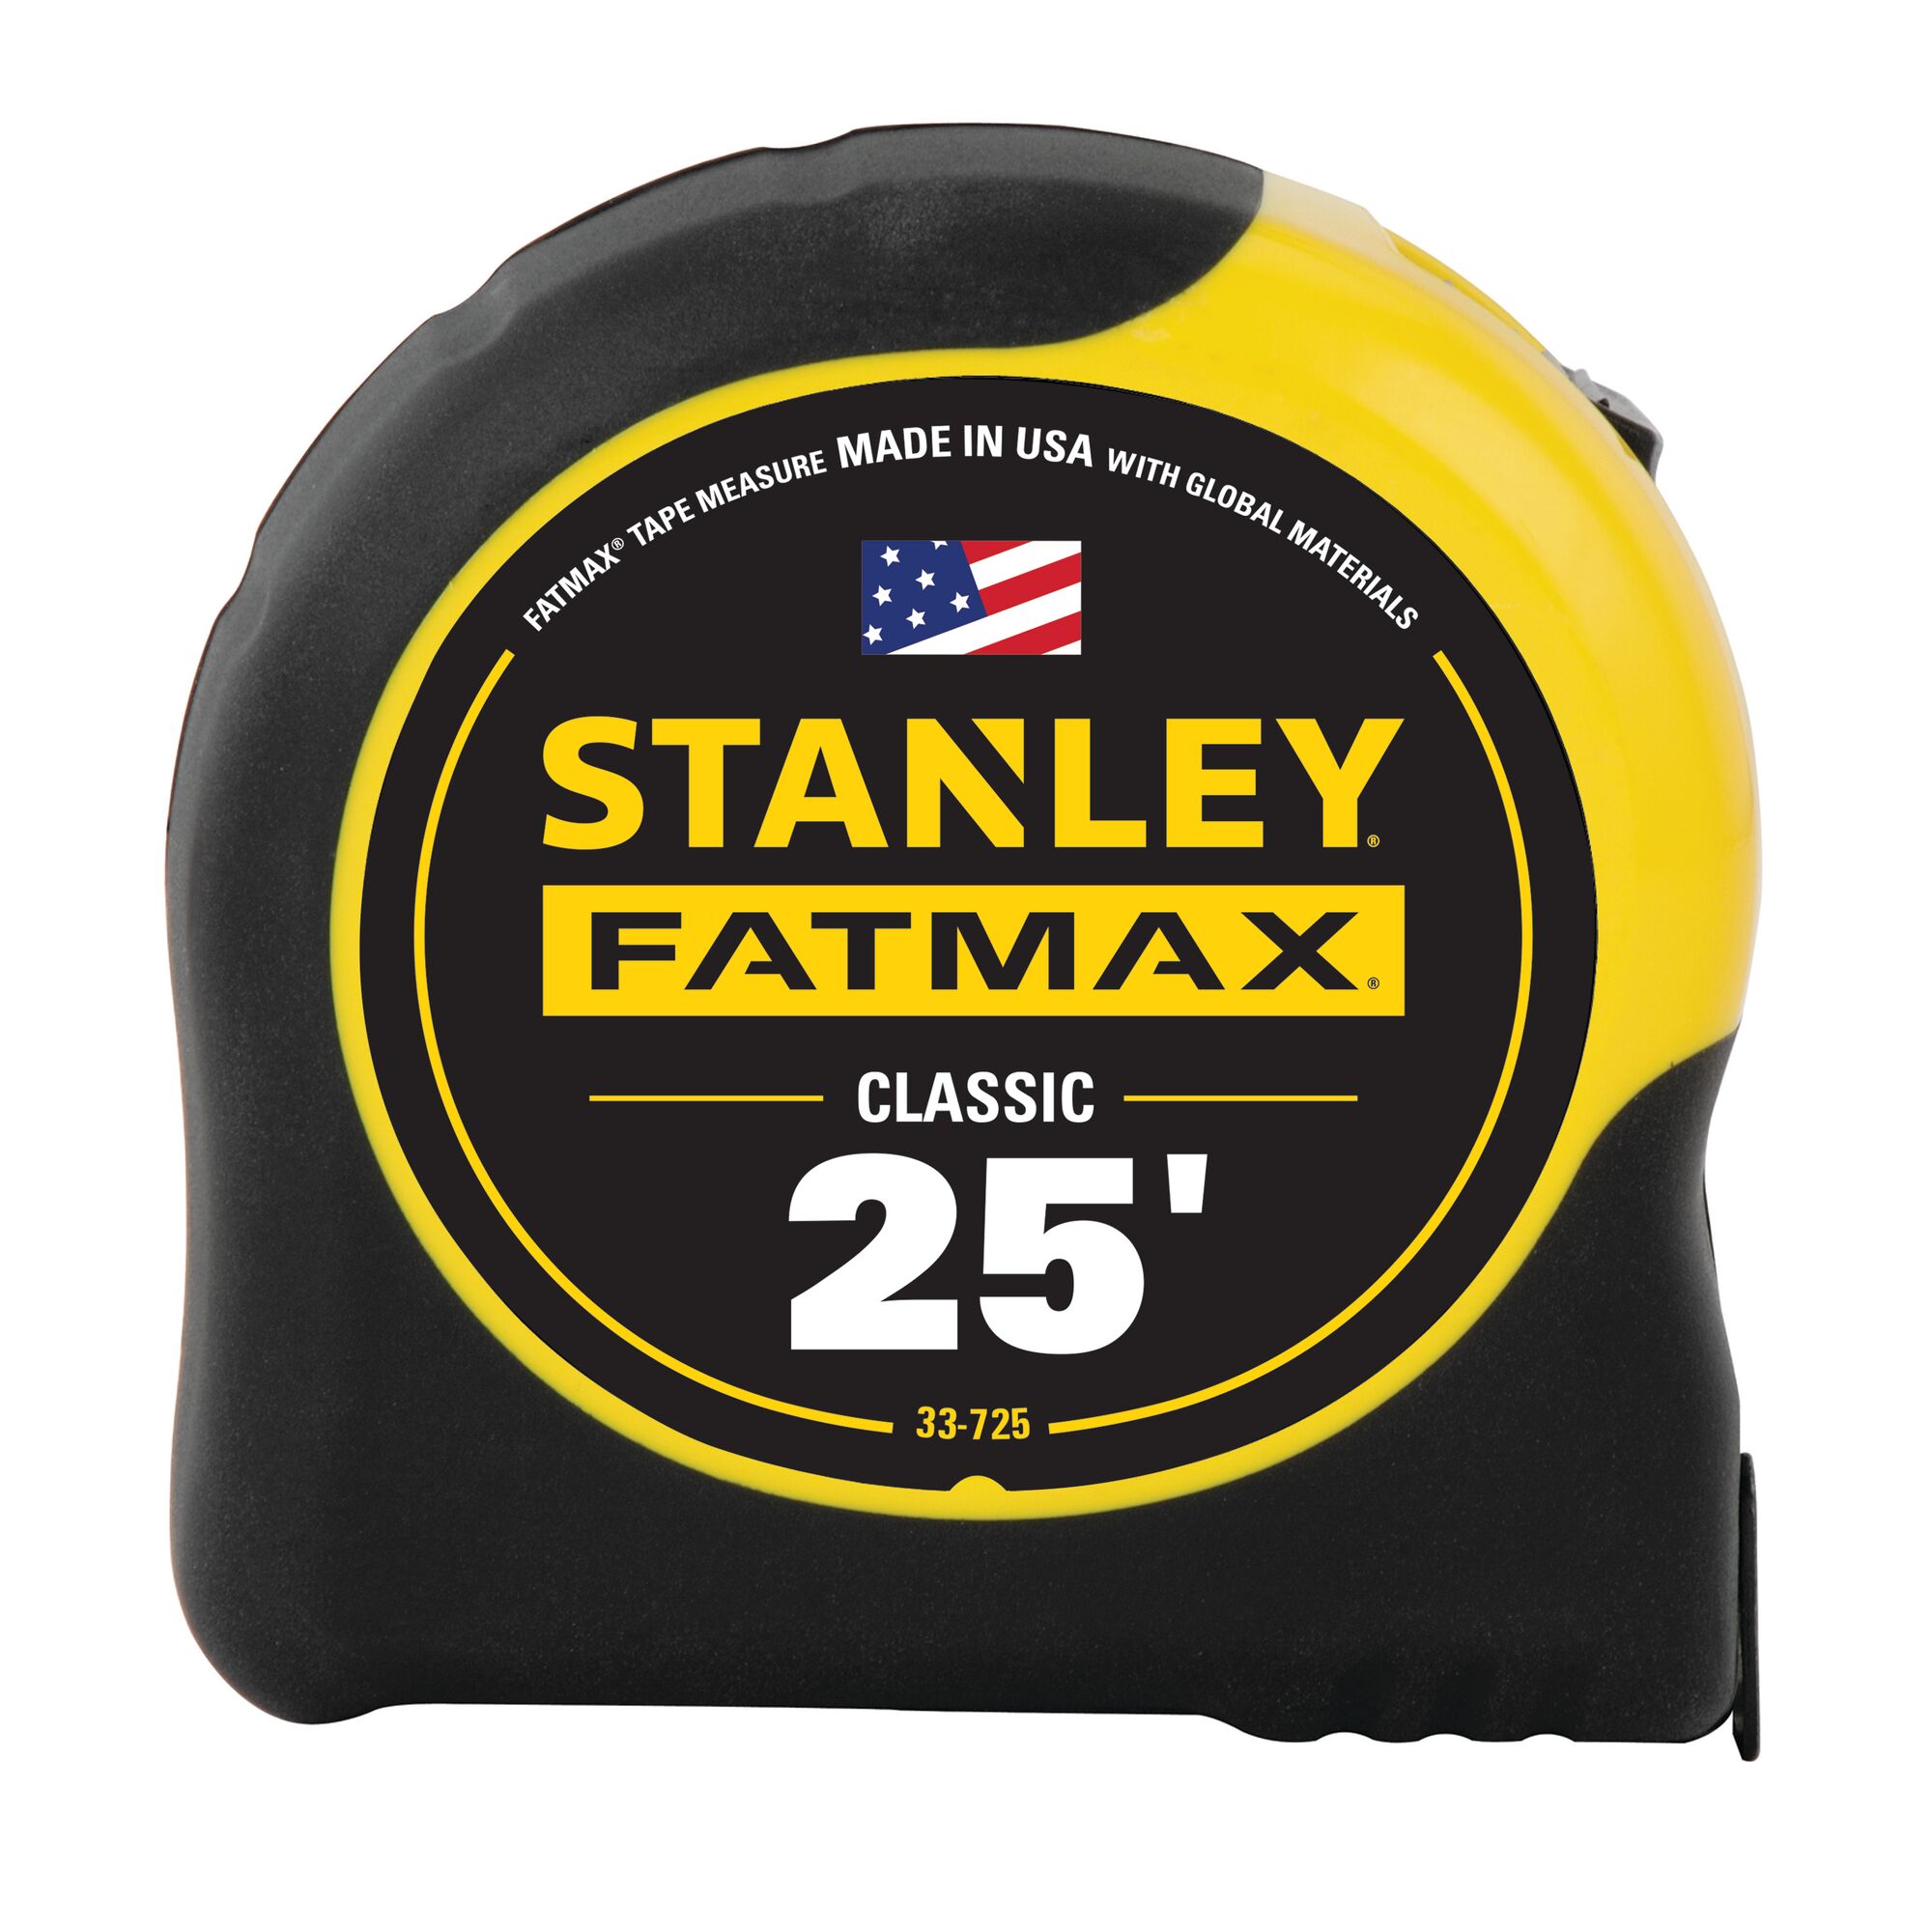 Stanley 25' Fat Max Tape Measure W/Blade Armor - Measuring Tools